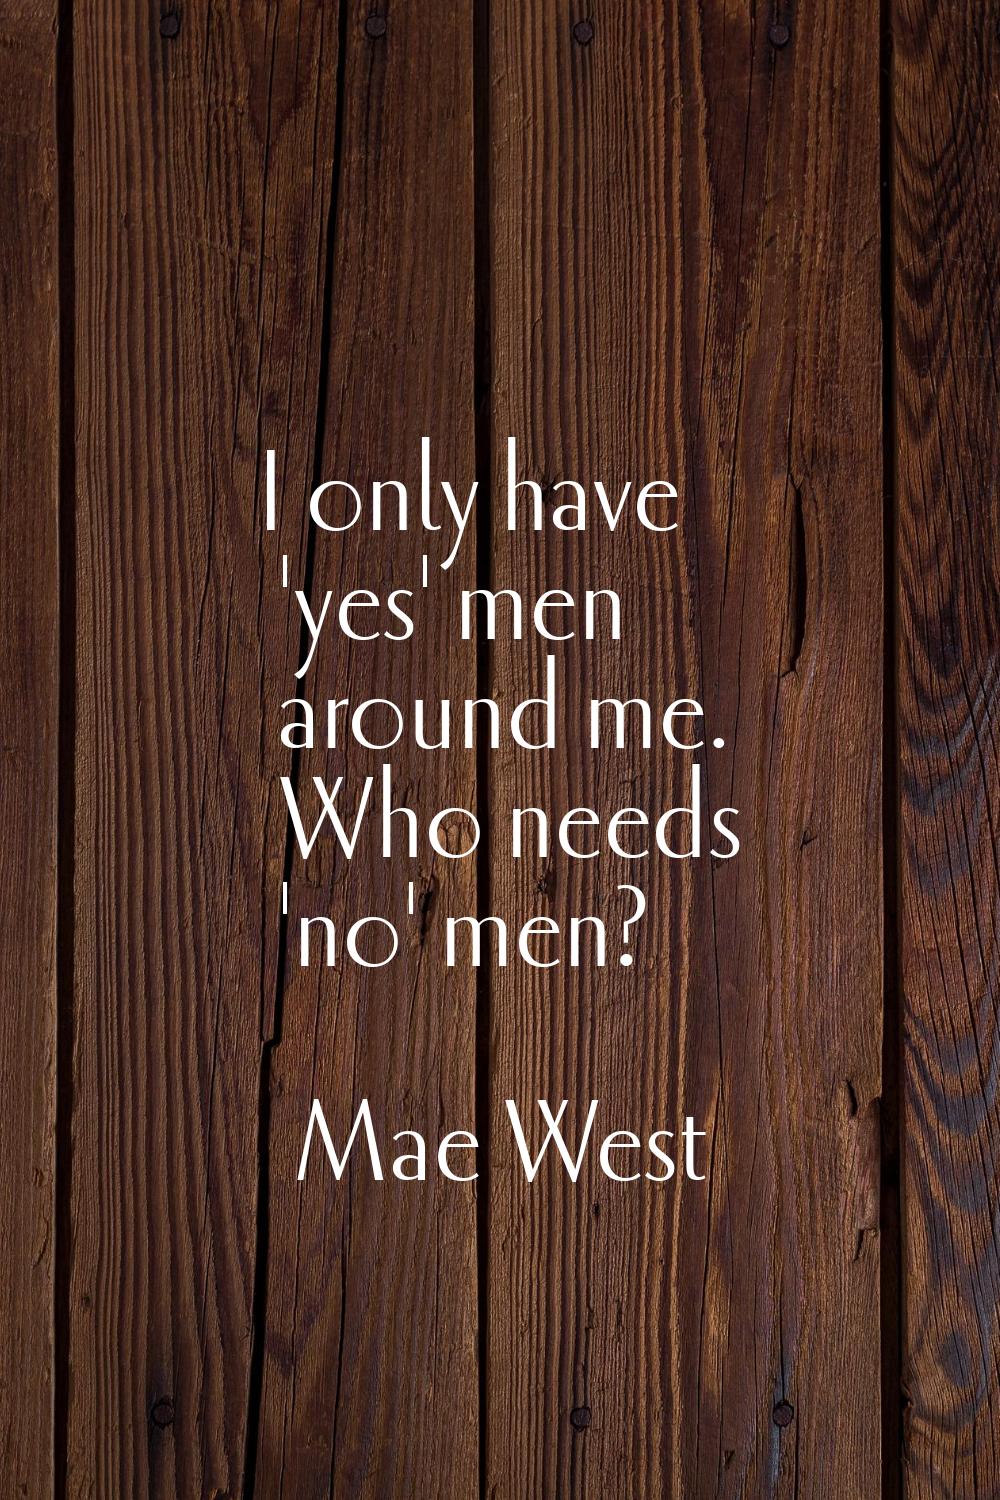 I only have 'yes' men around me. Who needs 'no' men?